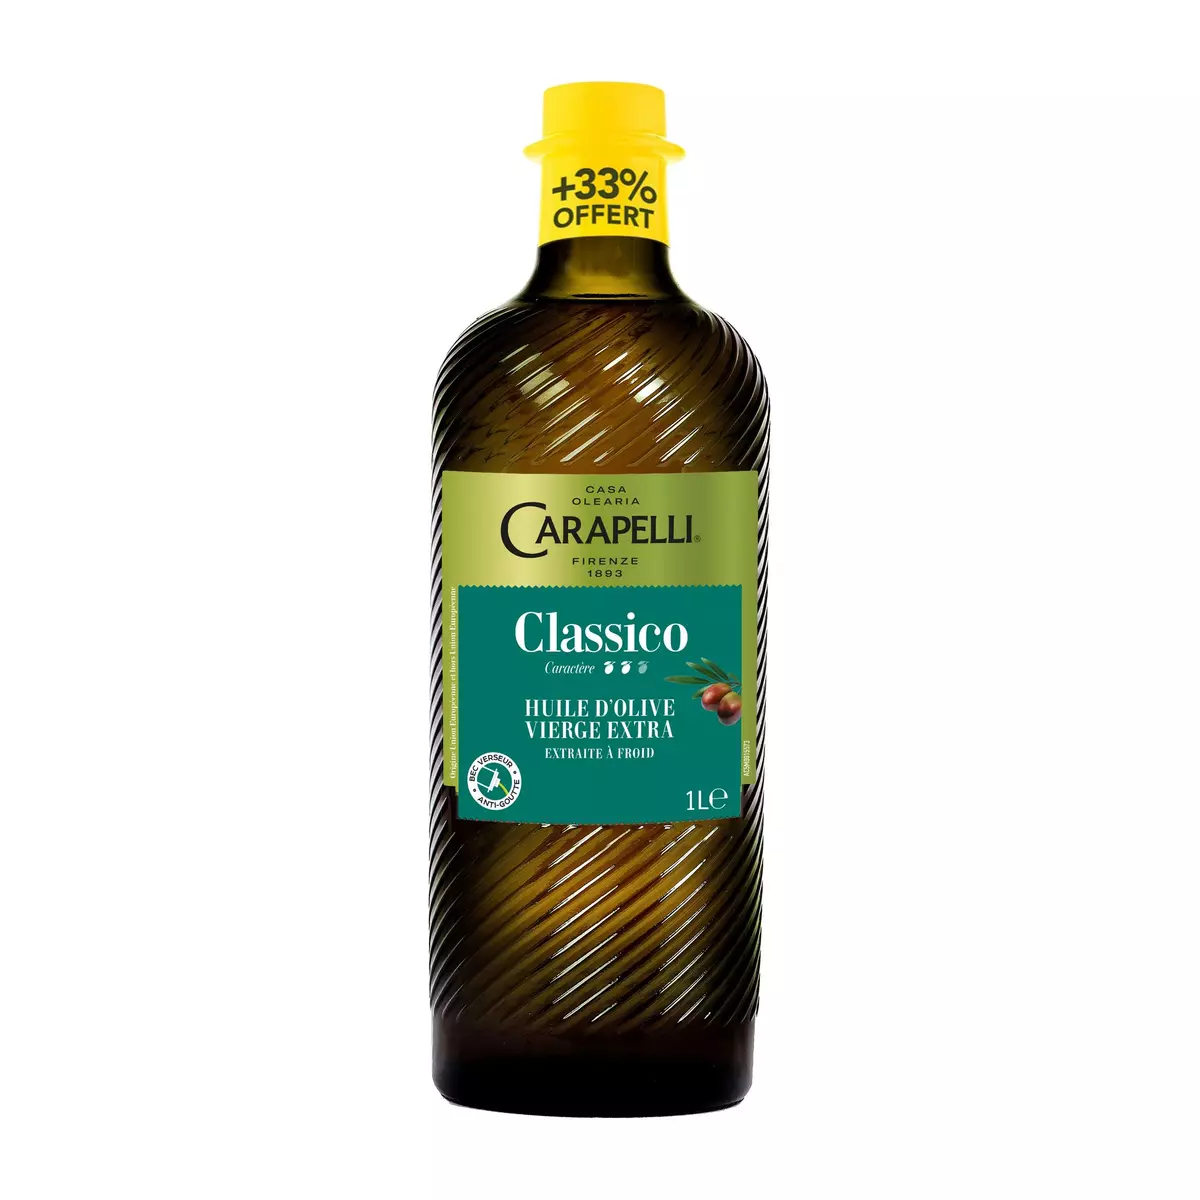 CARAPELLI Classico huile d'olive vierge extra 75cl+33% offert 1l